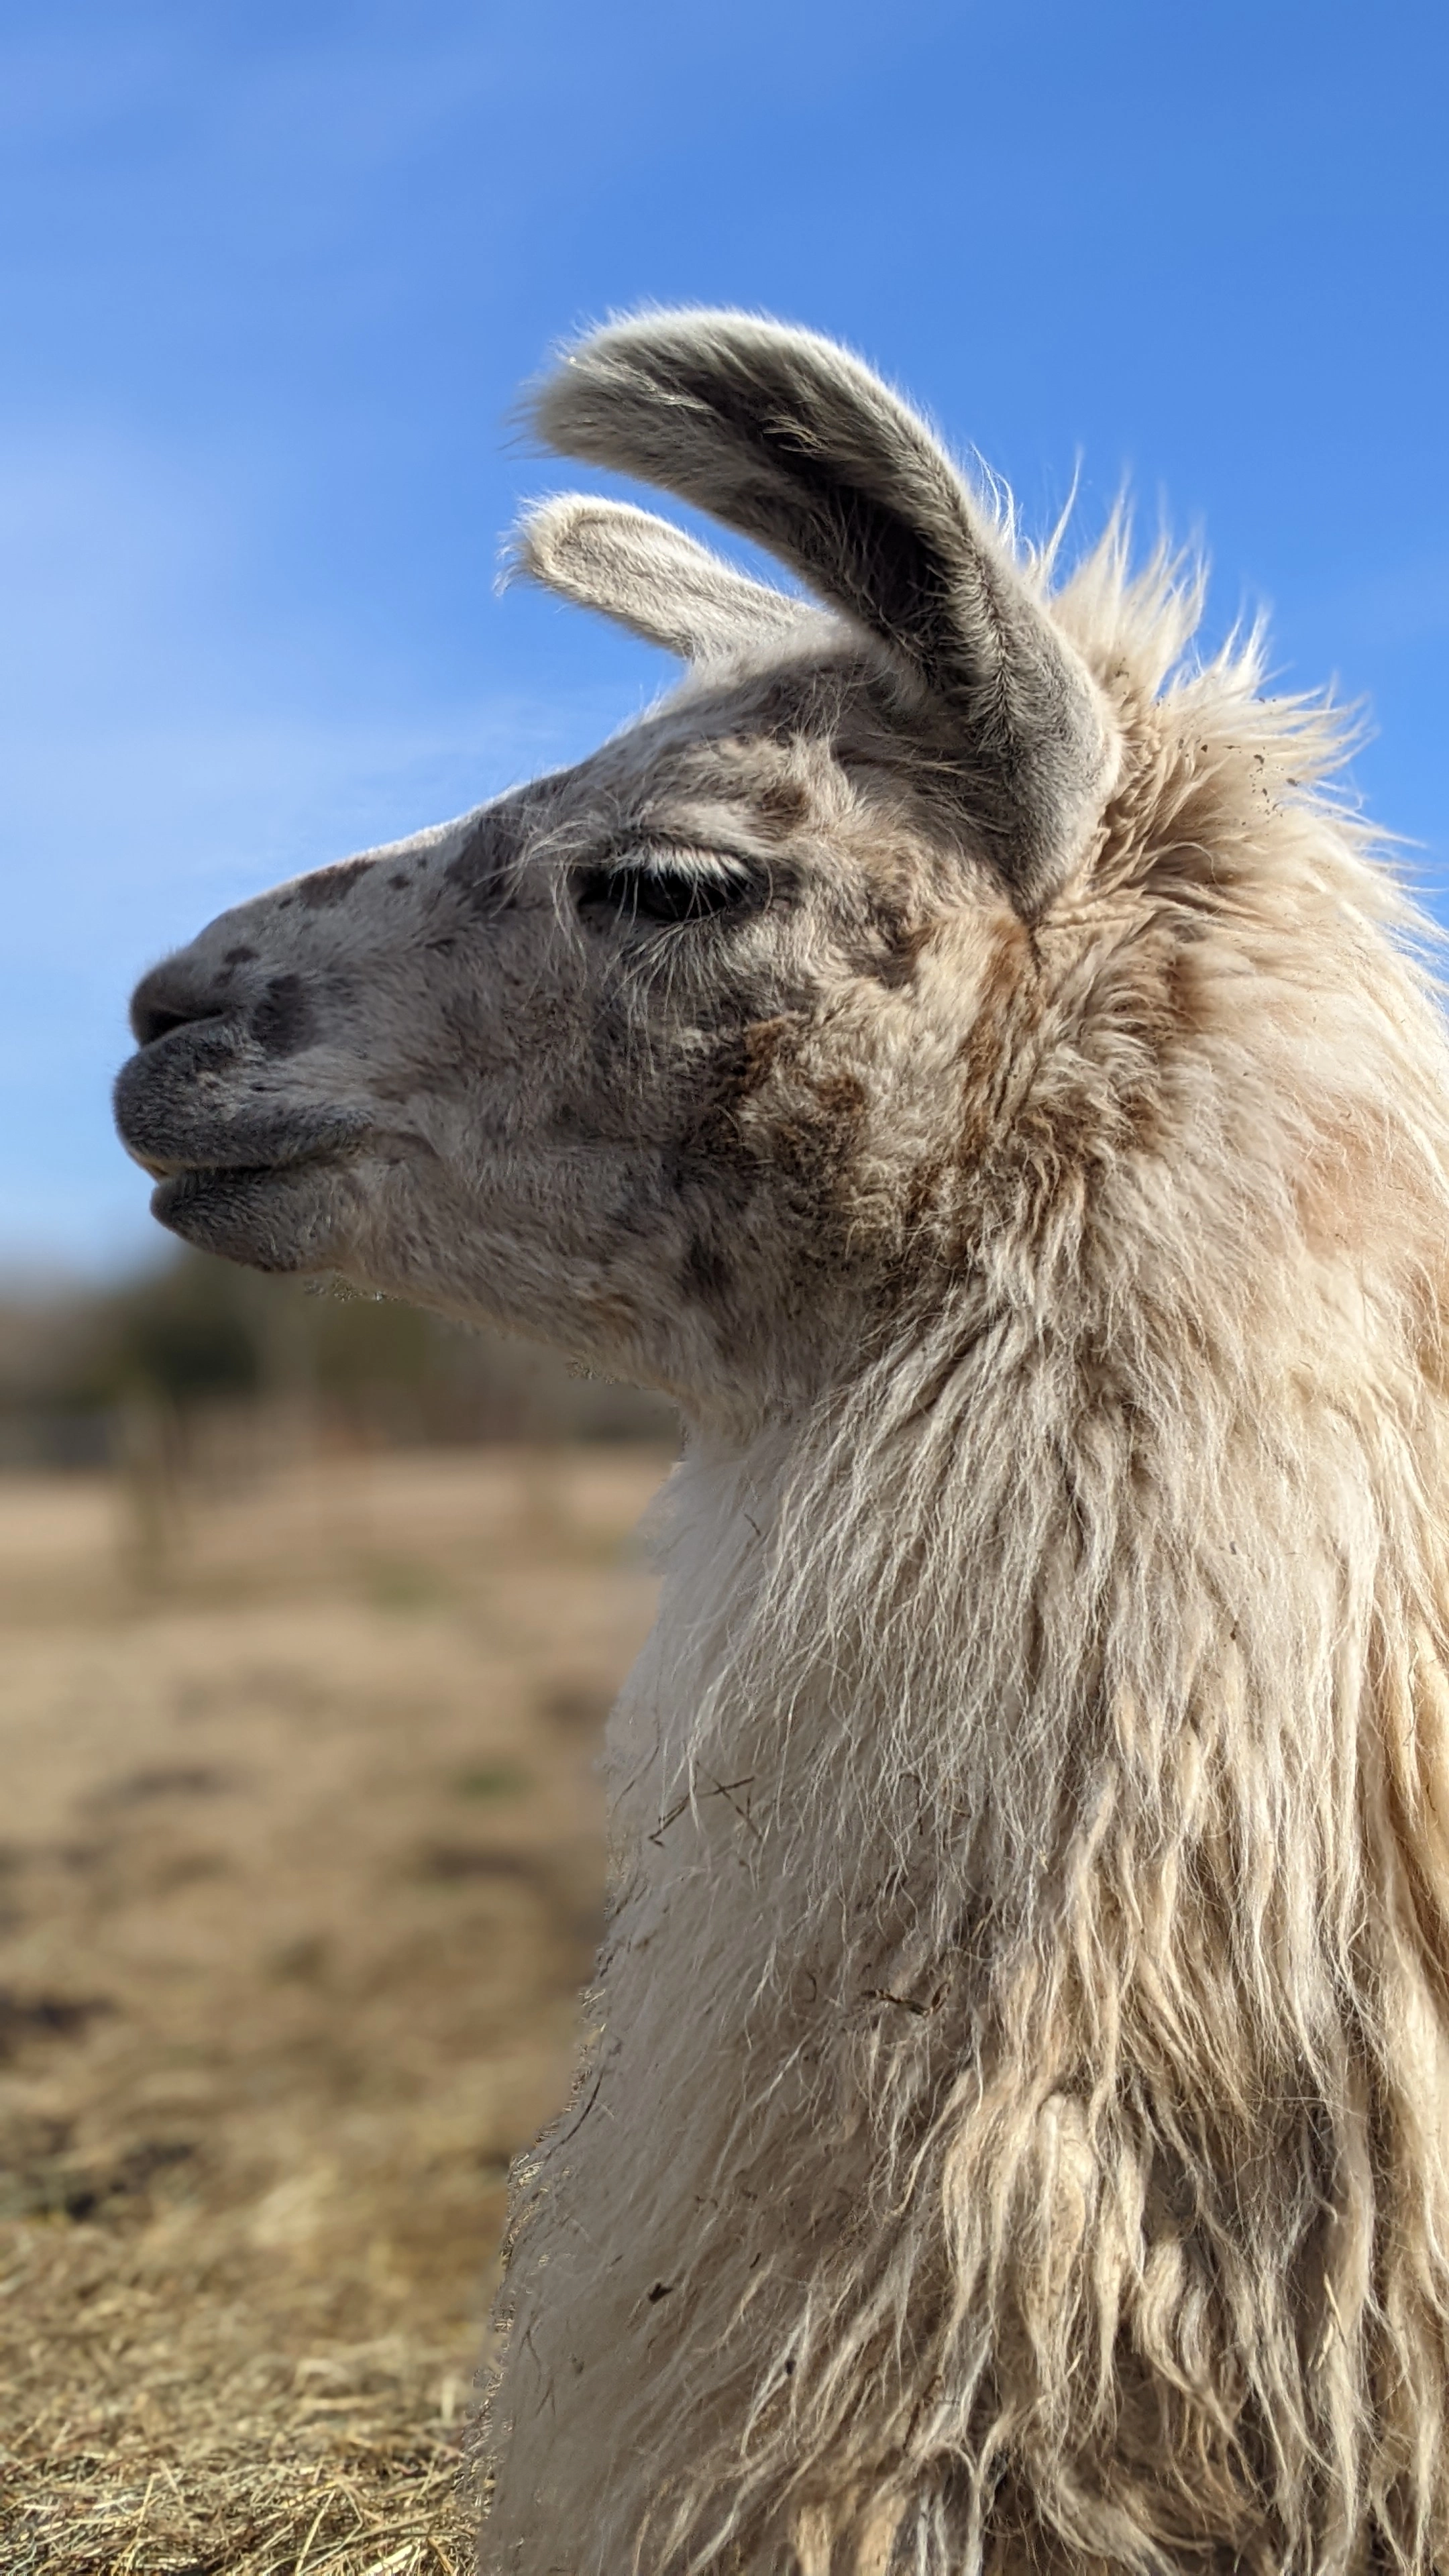 A portrait image of a llama named Speckles